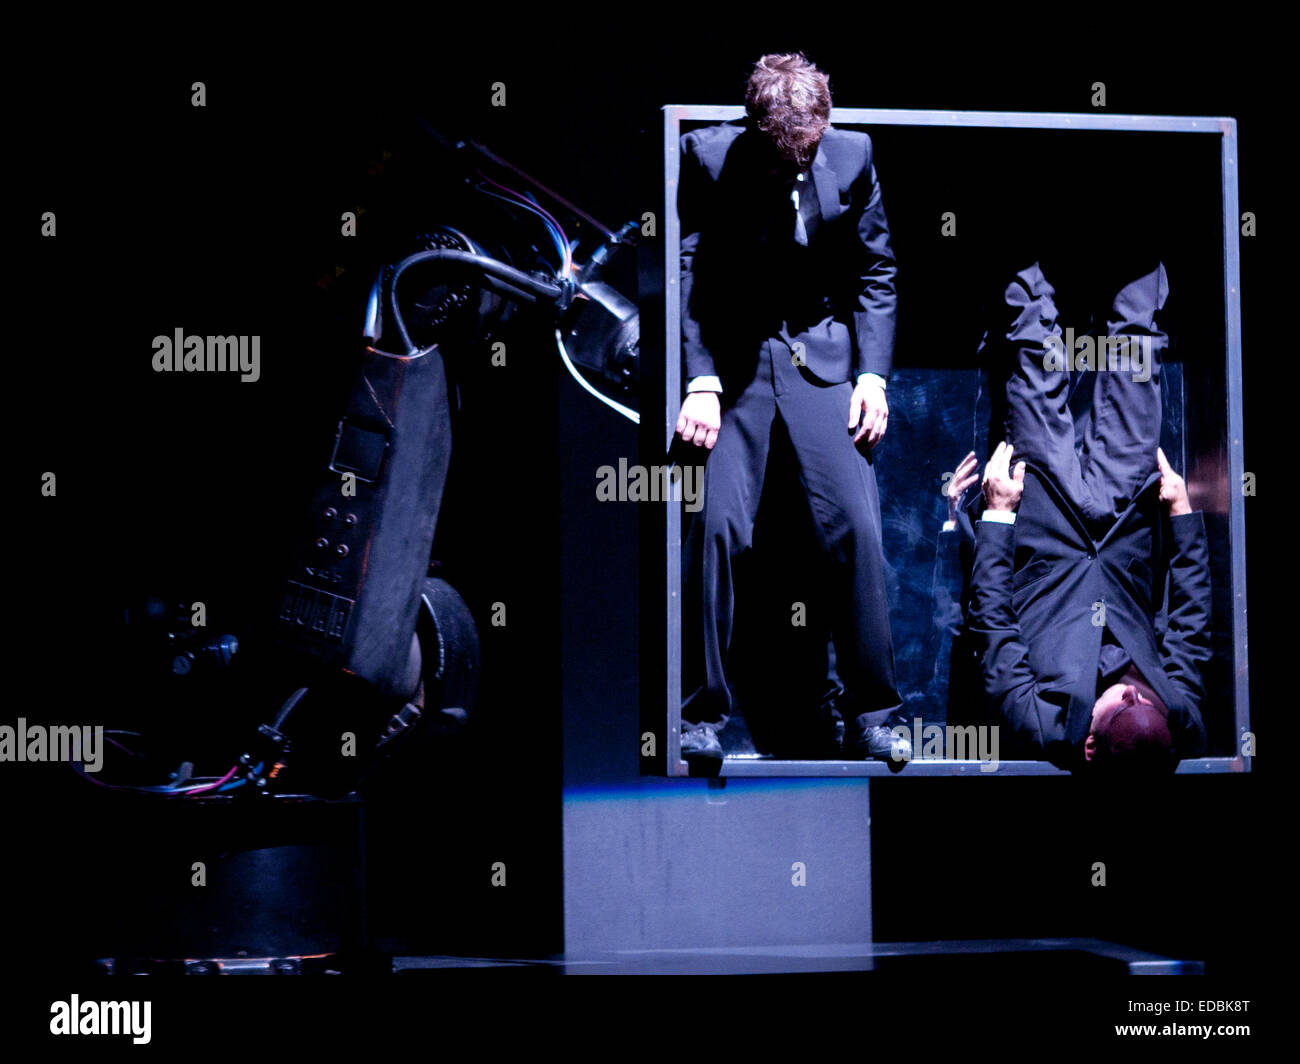 Compagnie 111 (FRA) performed at Trafo stage, Budapest, Hungary Sept 12, 2012 Stock Photo